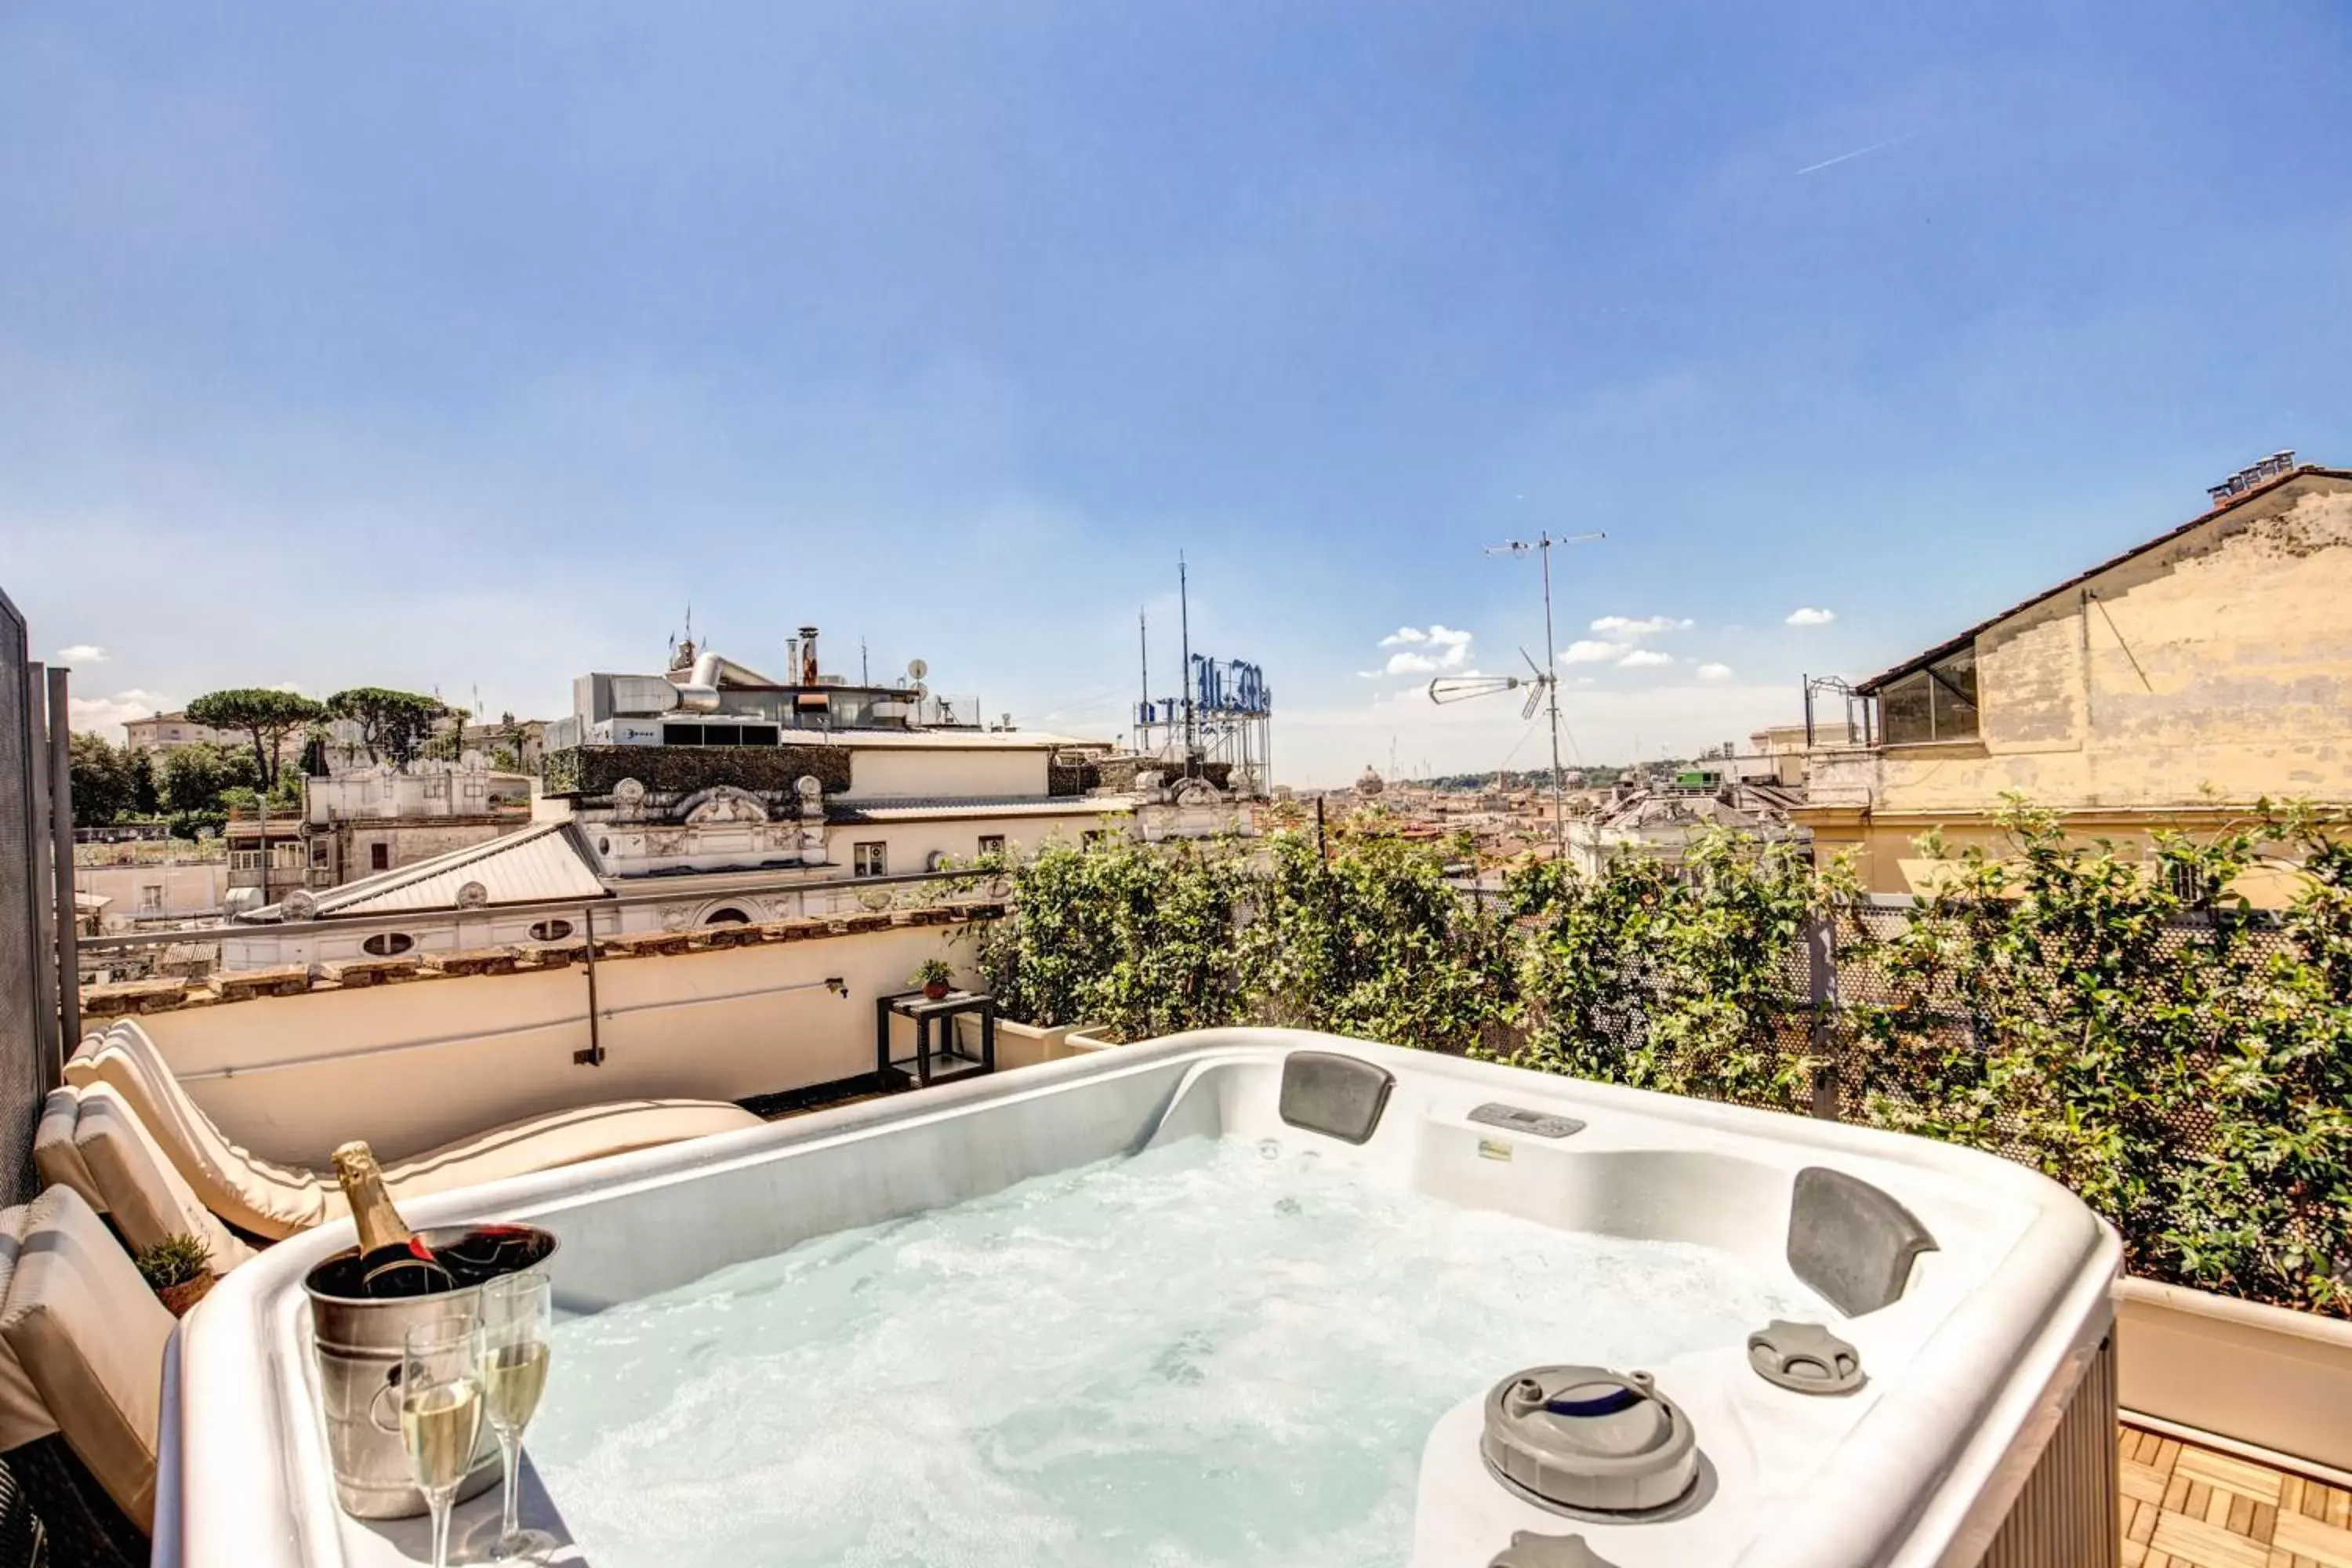 Hot Tub in Hotel 87 eighty-seven - Maison d'Art Collection